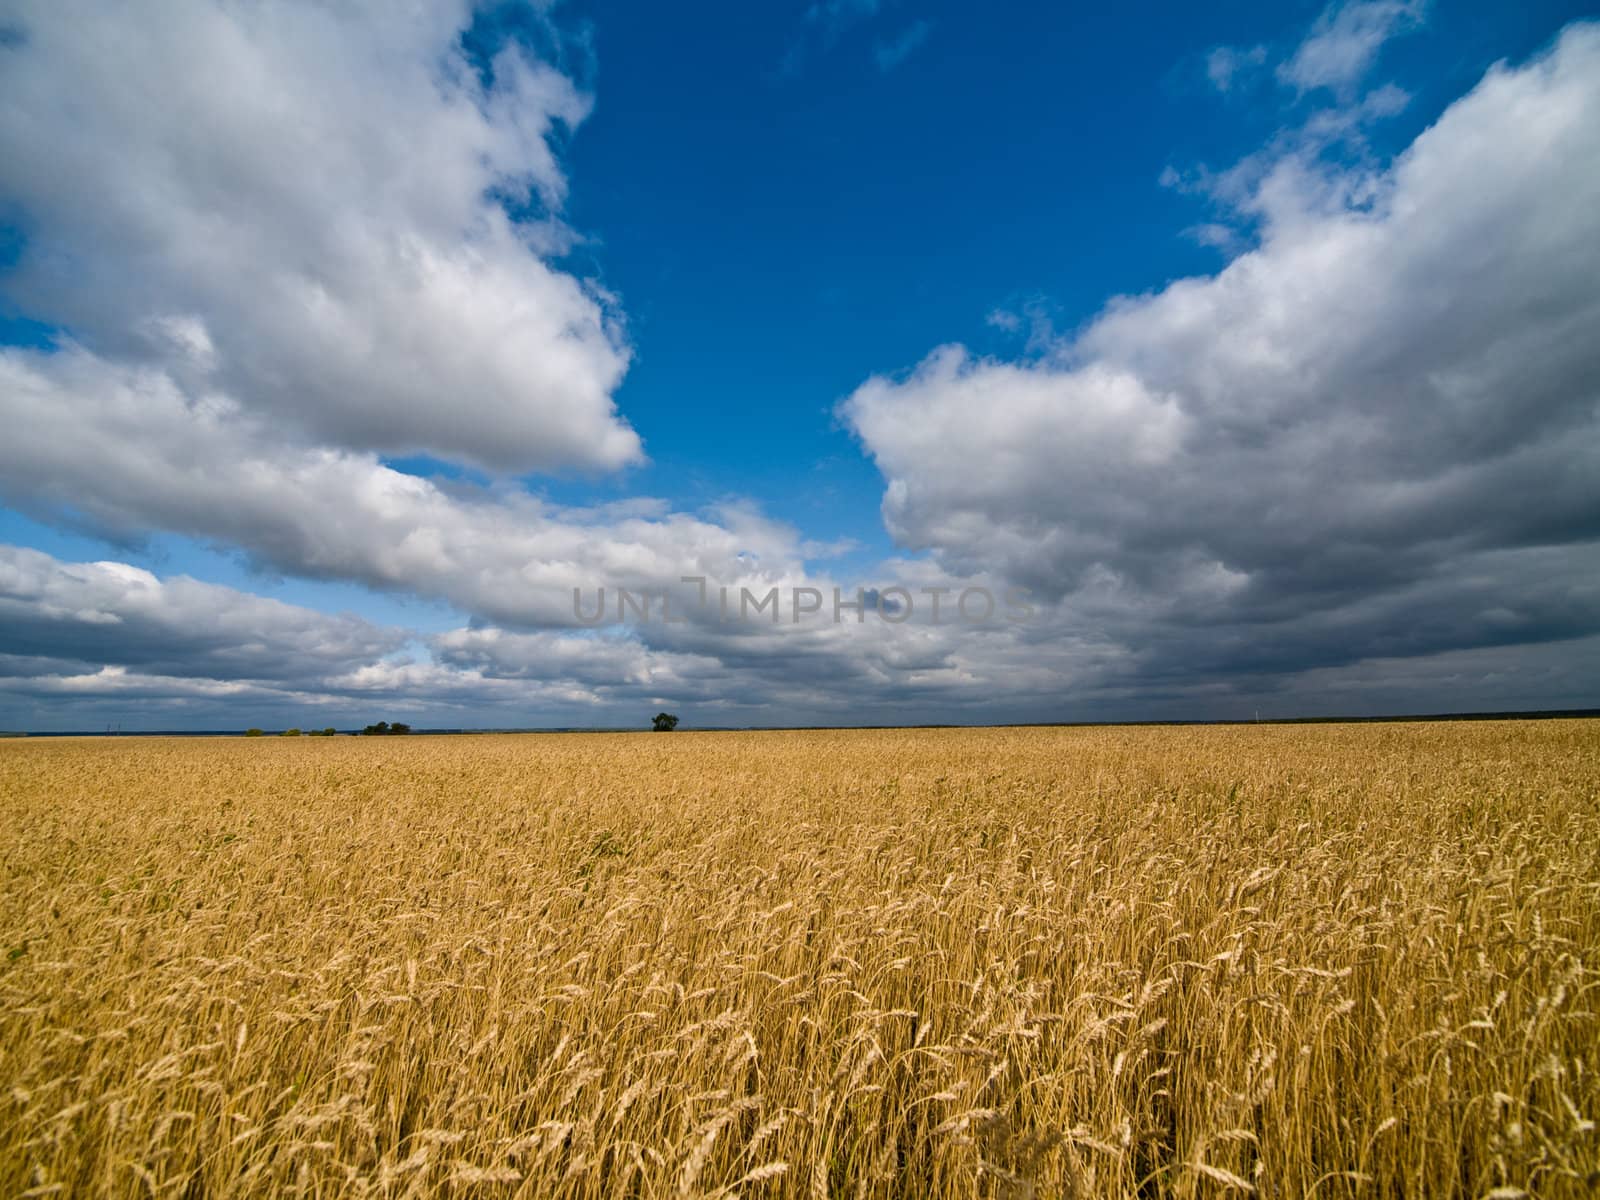 Landscape with cornfield under dramatic leaden sky. Wide angle shot